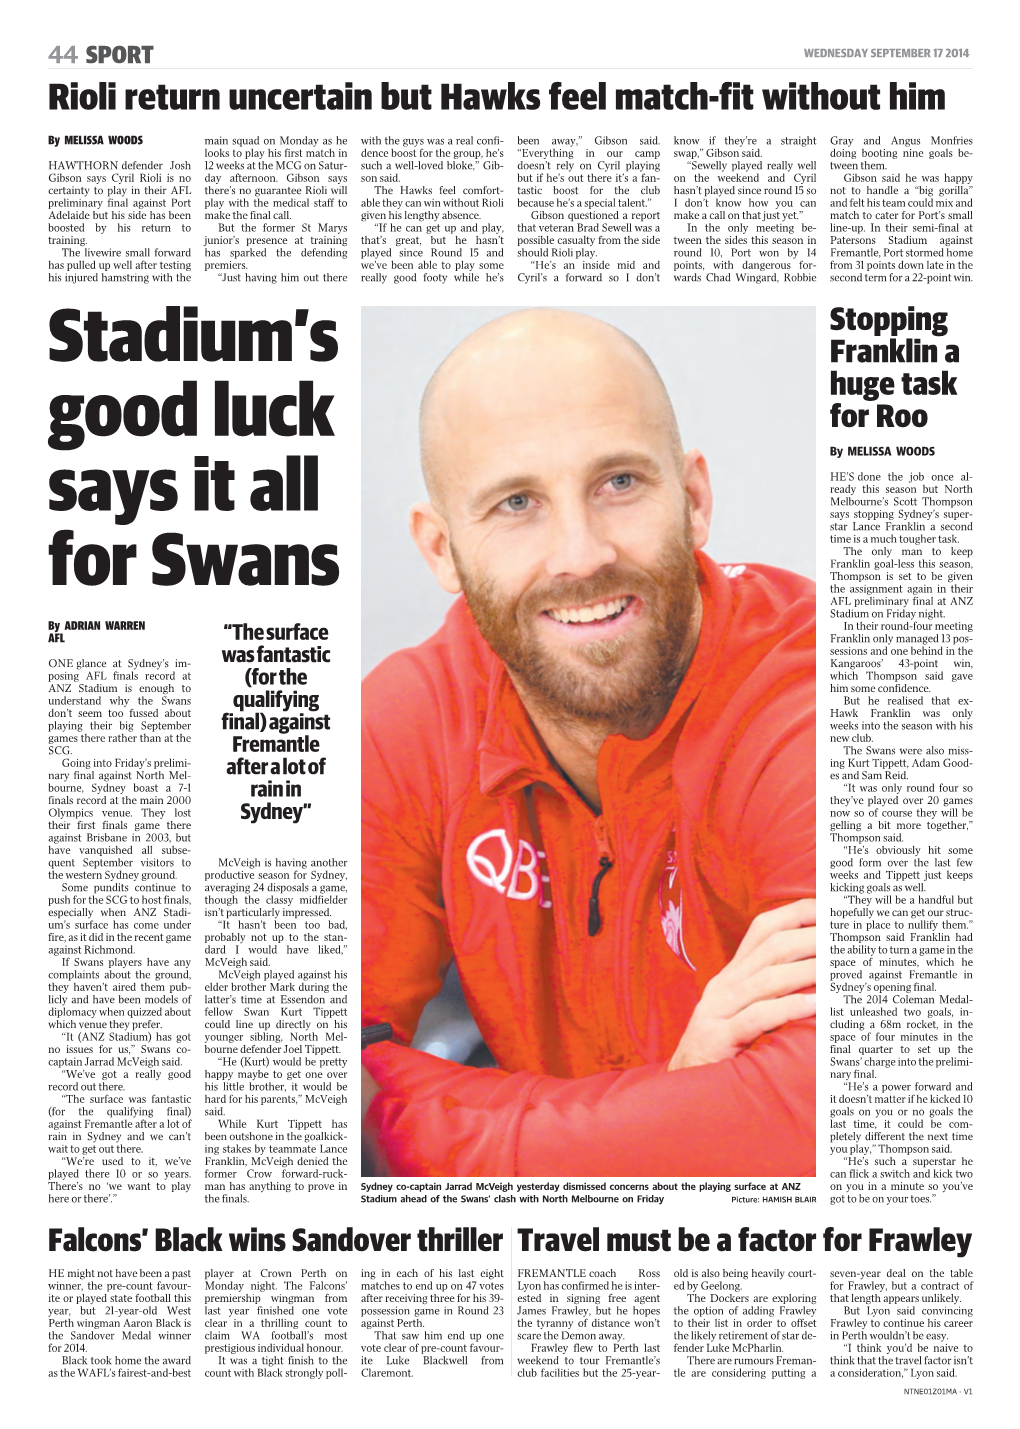 Stadium's Good Luck Says It All for Swans